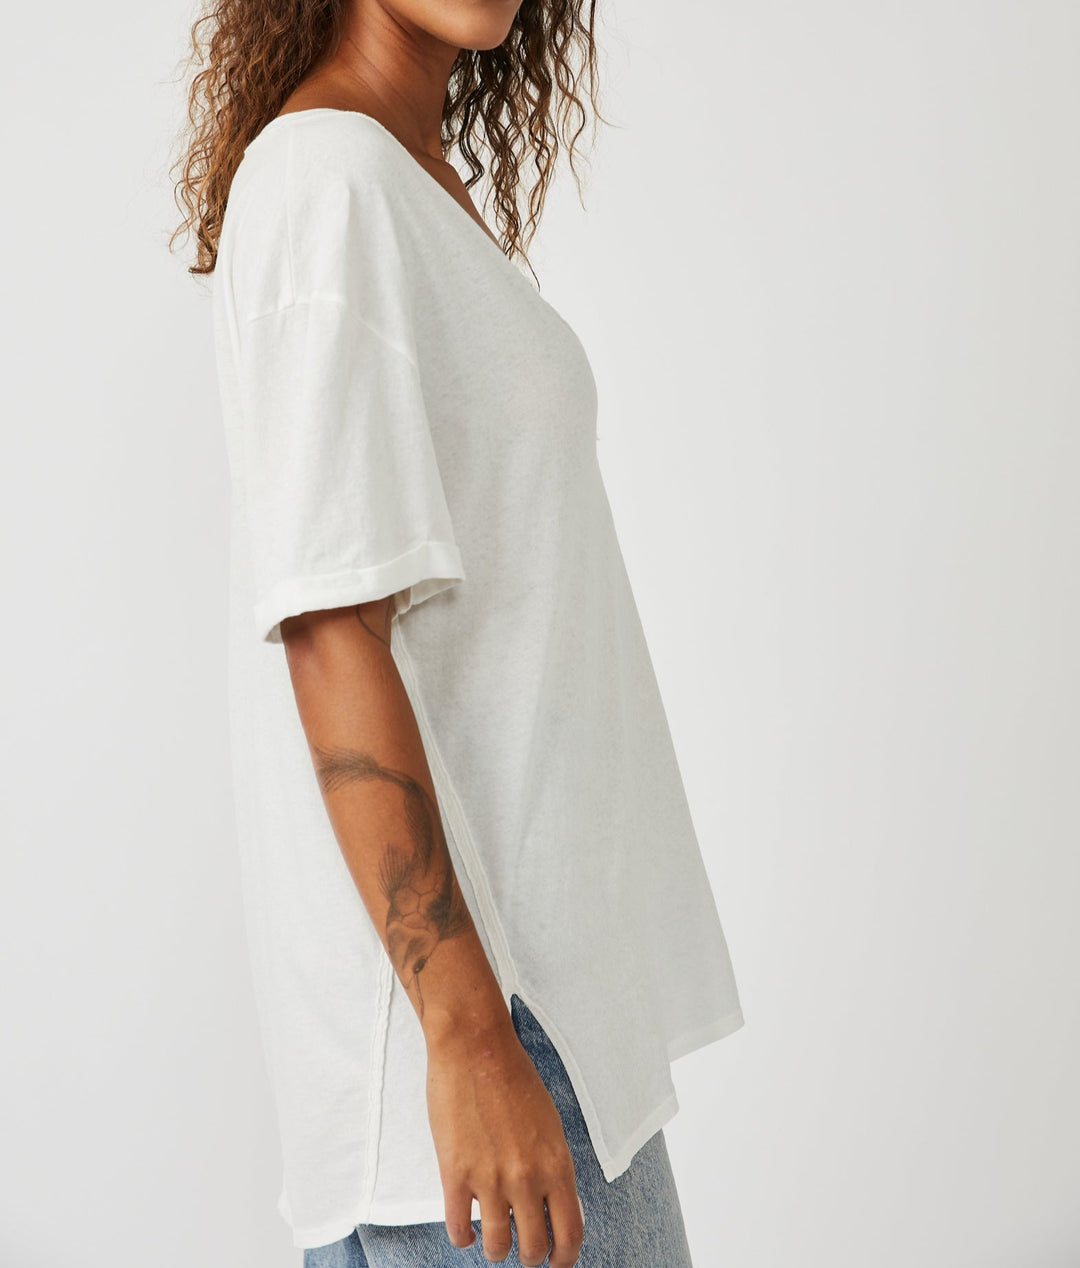 KEEP ME V-NECK TEE - OPTIC WHITE - Kingfisher Road - Online Boutique